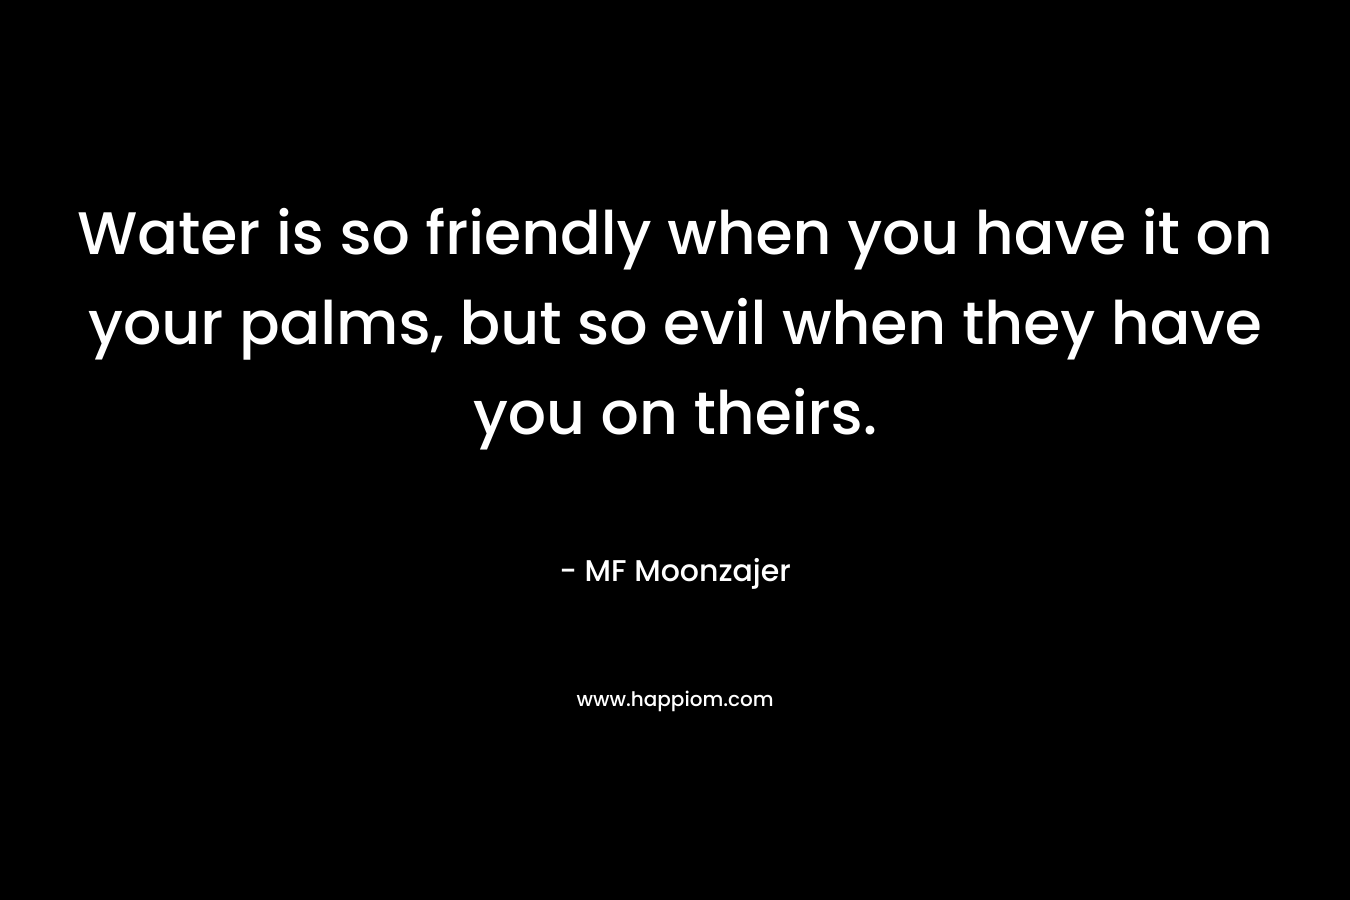 Water is so friendly when you have it on your palms, but so evil when they have you on theirs. – MF Moonzajer